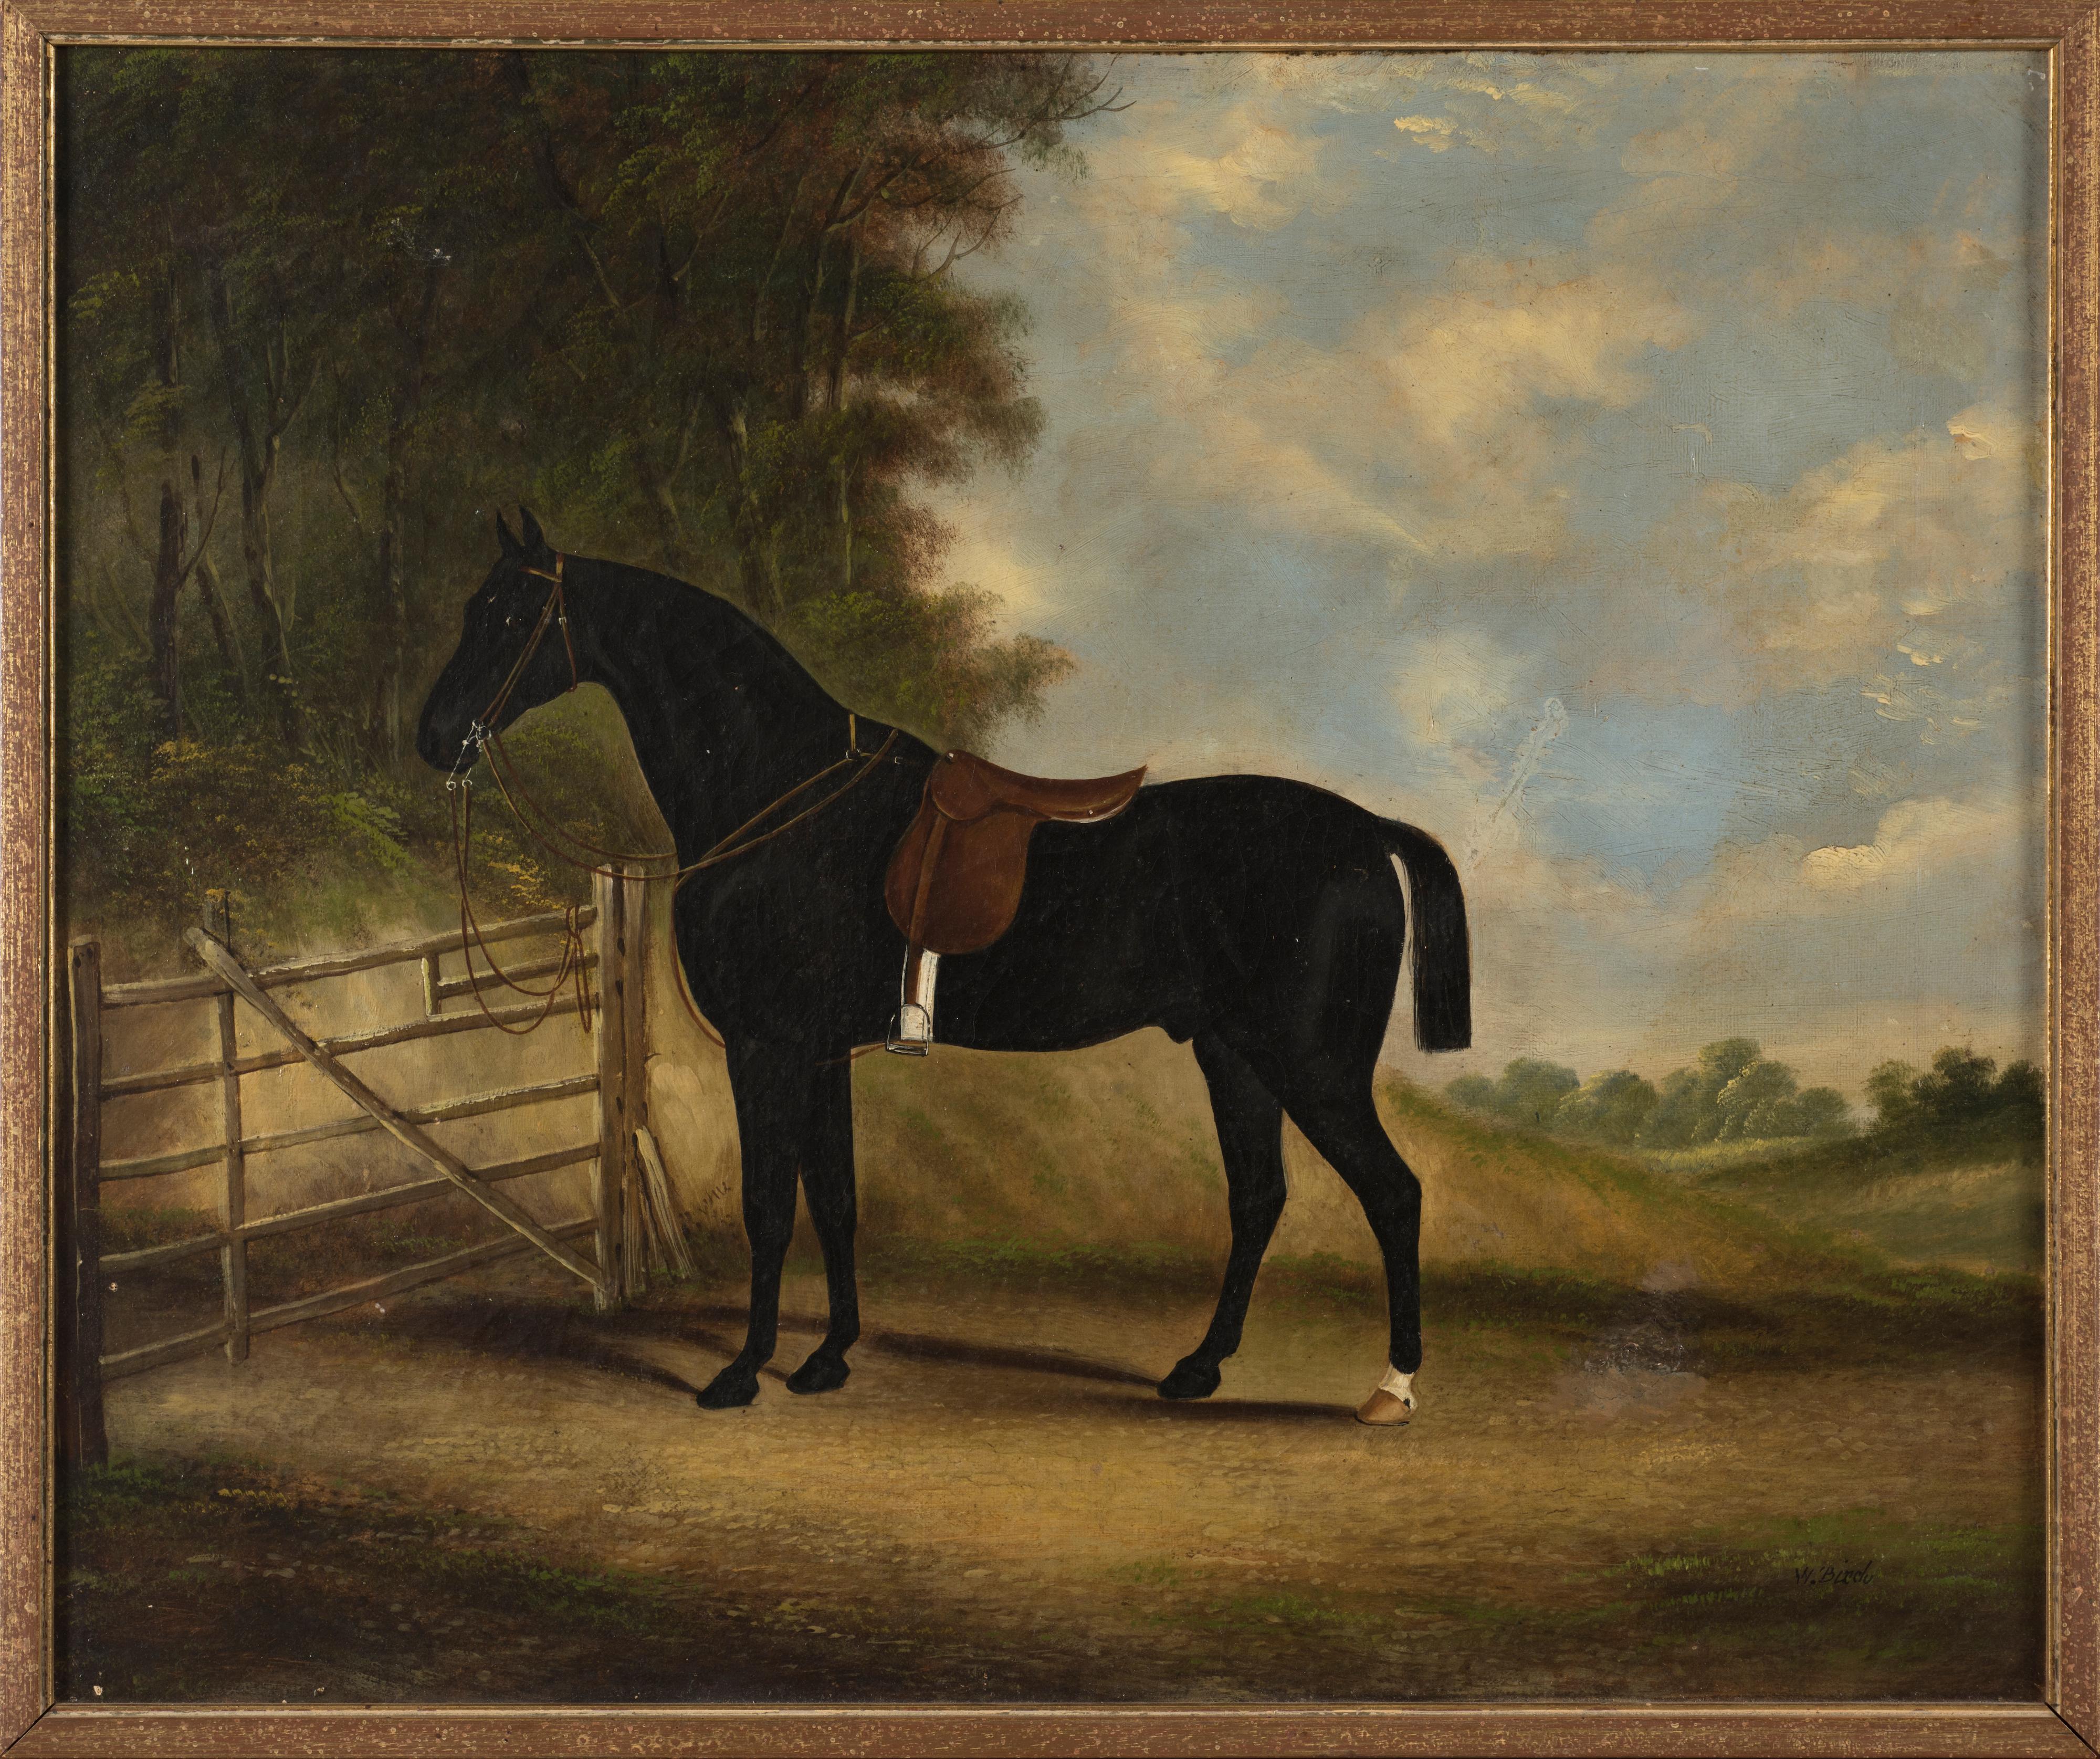 Thoroughbred Horse in a Stall - Original Oil on Canvas by Alfonso Grace - 1833 1